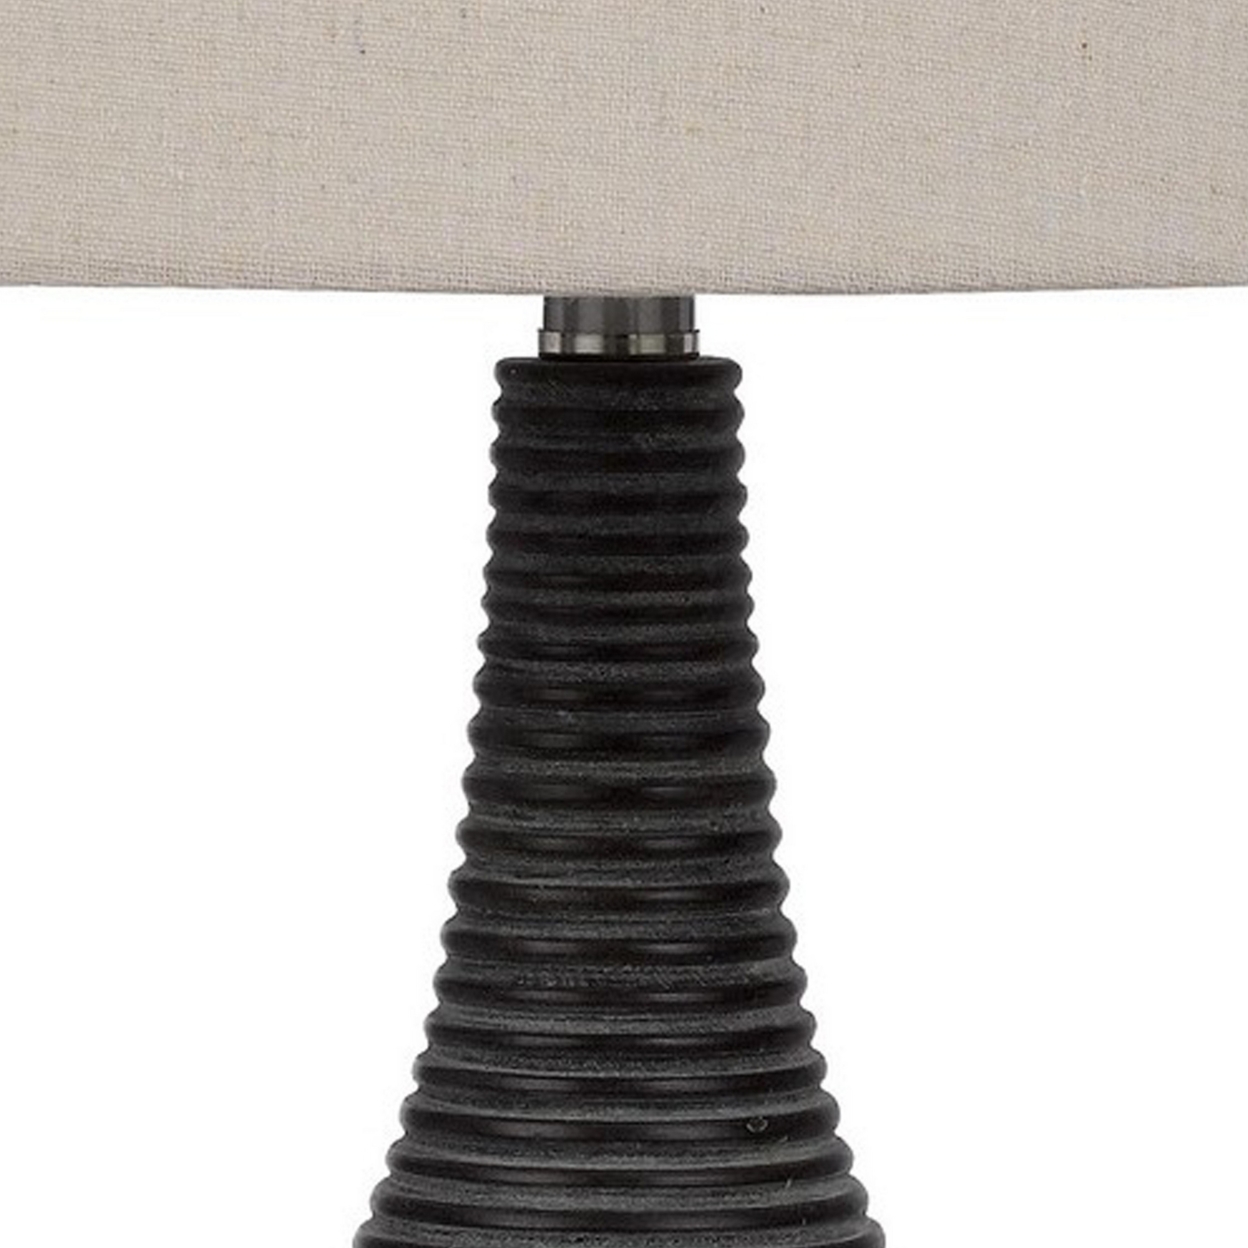 29 Inch Classic Table Lamp, Textured Lined Body, Ceramic, Charcoal Black- Saltoro Sherpi